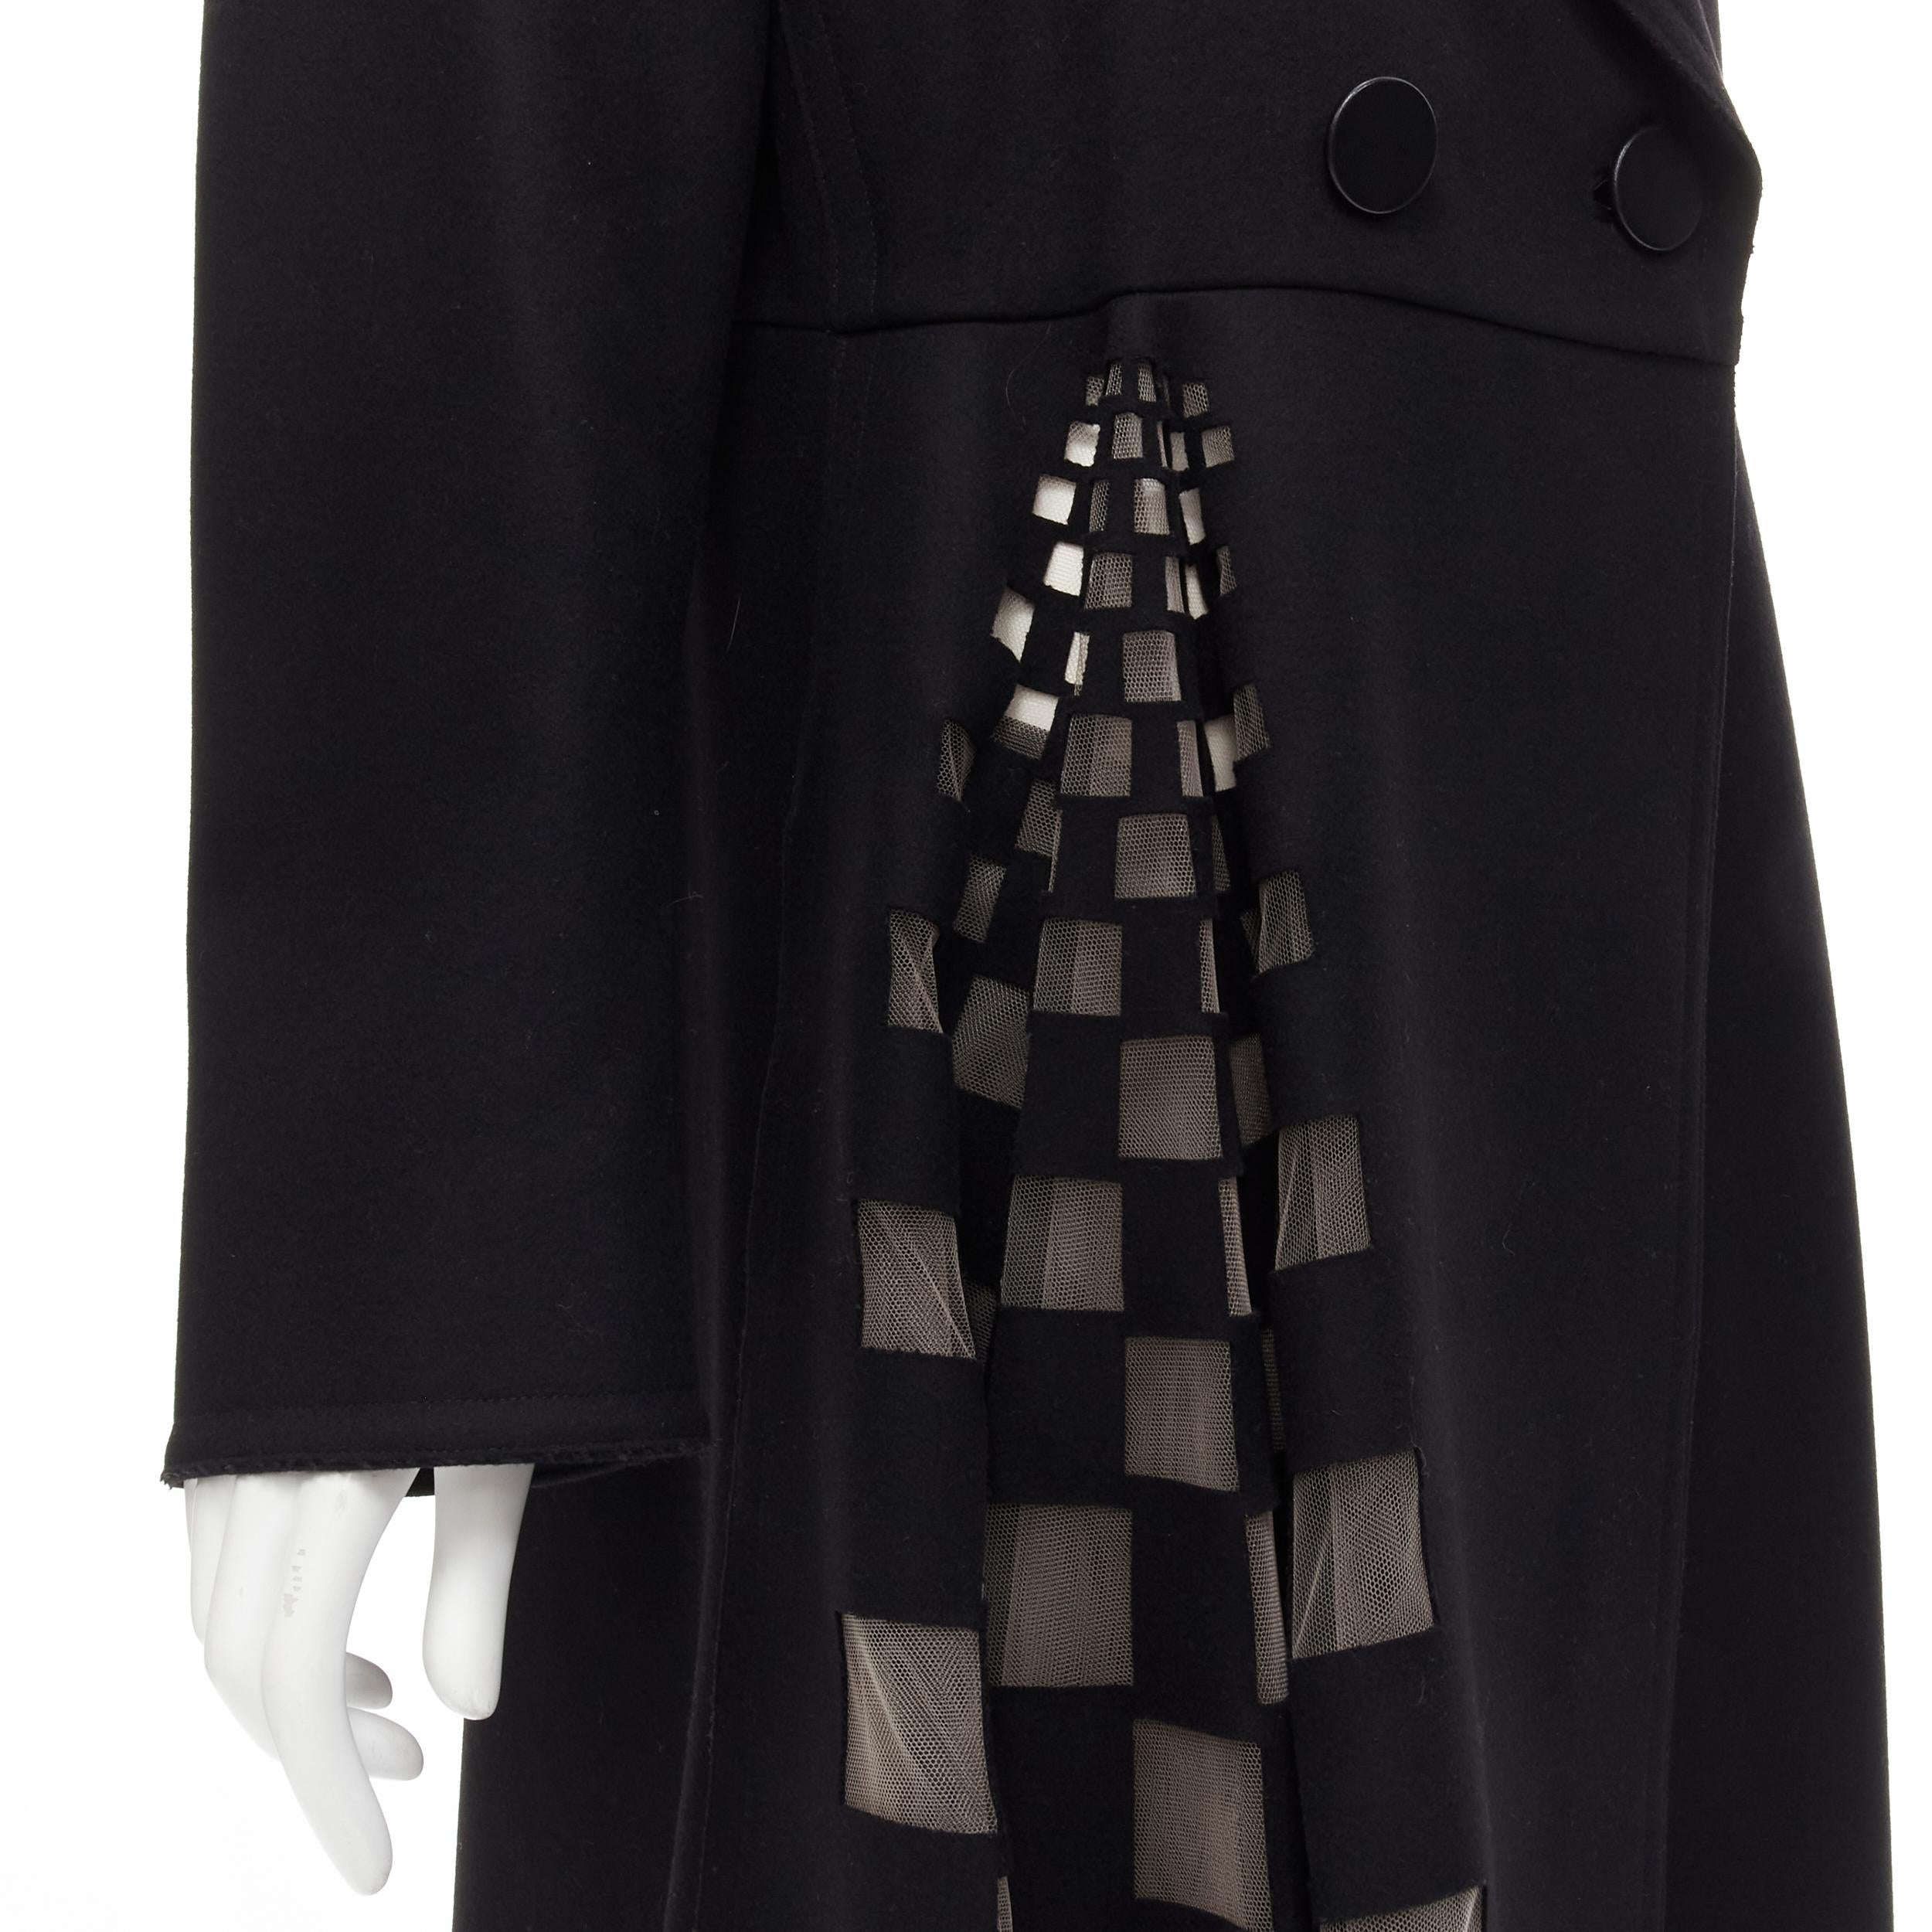 FENDI Runway black fleece wool checkered cut out mesh flared coat dress IT48 XL 
Reference: GIYG/A00177 
Brand: Fendi 
Material: Wool 
Color: Black 
Pattern: Solid 
Closure: Button 
Extra Detail: Black fleece wool. Spread collar. Leather wrapped